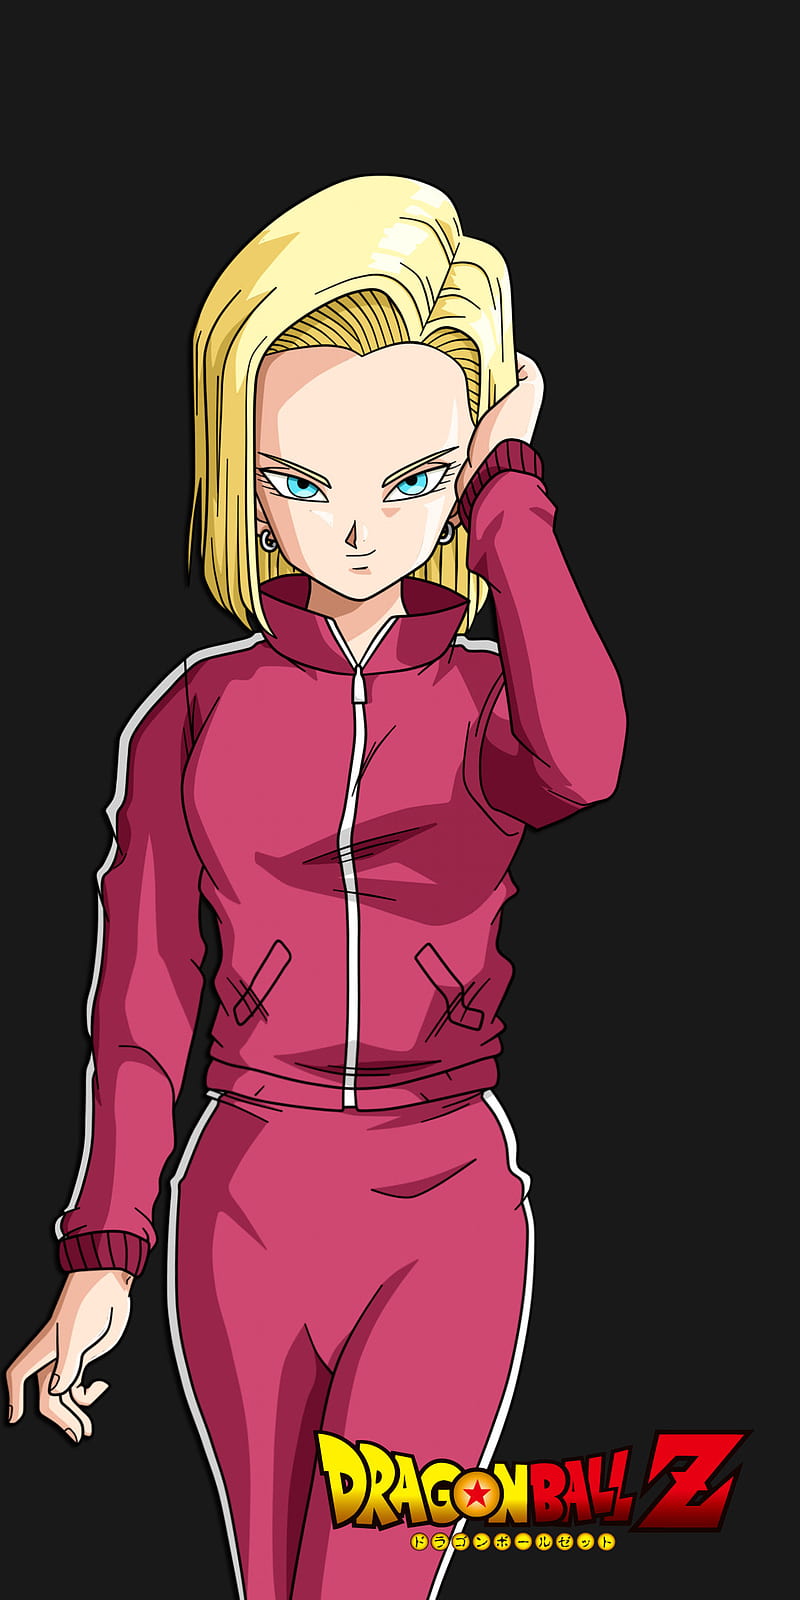 HD android 18 wallpapers | Peakpx